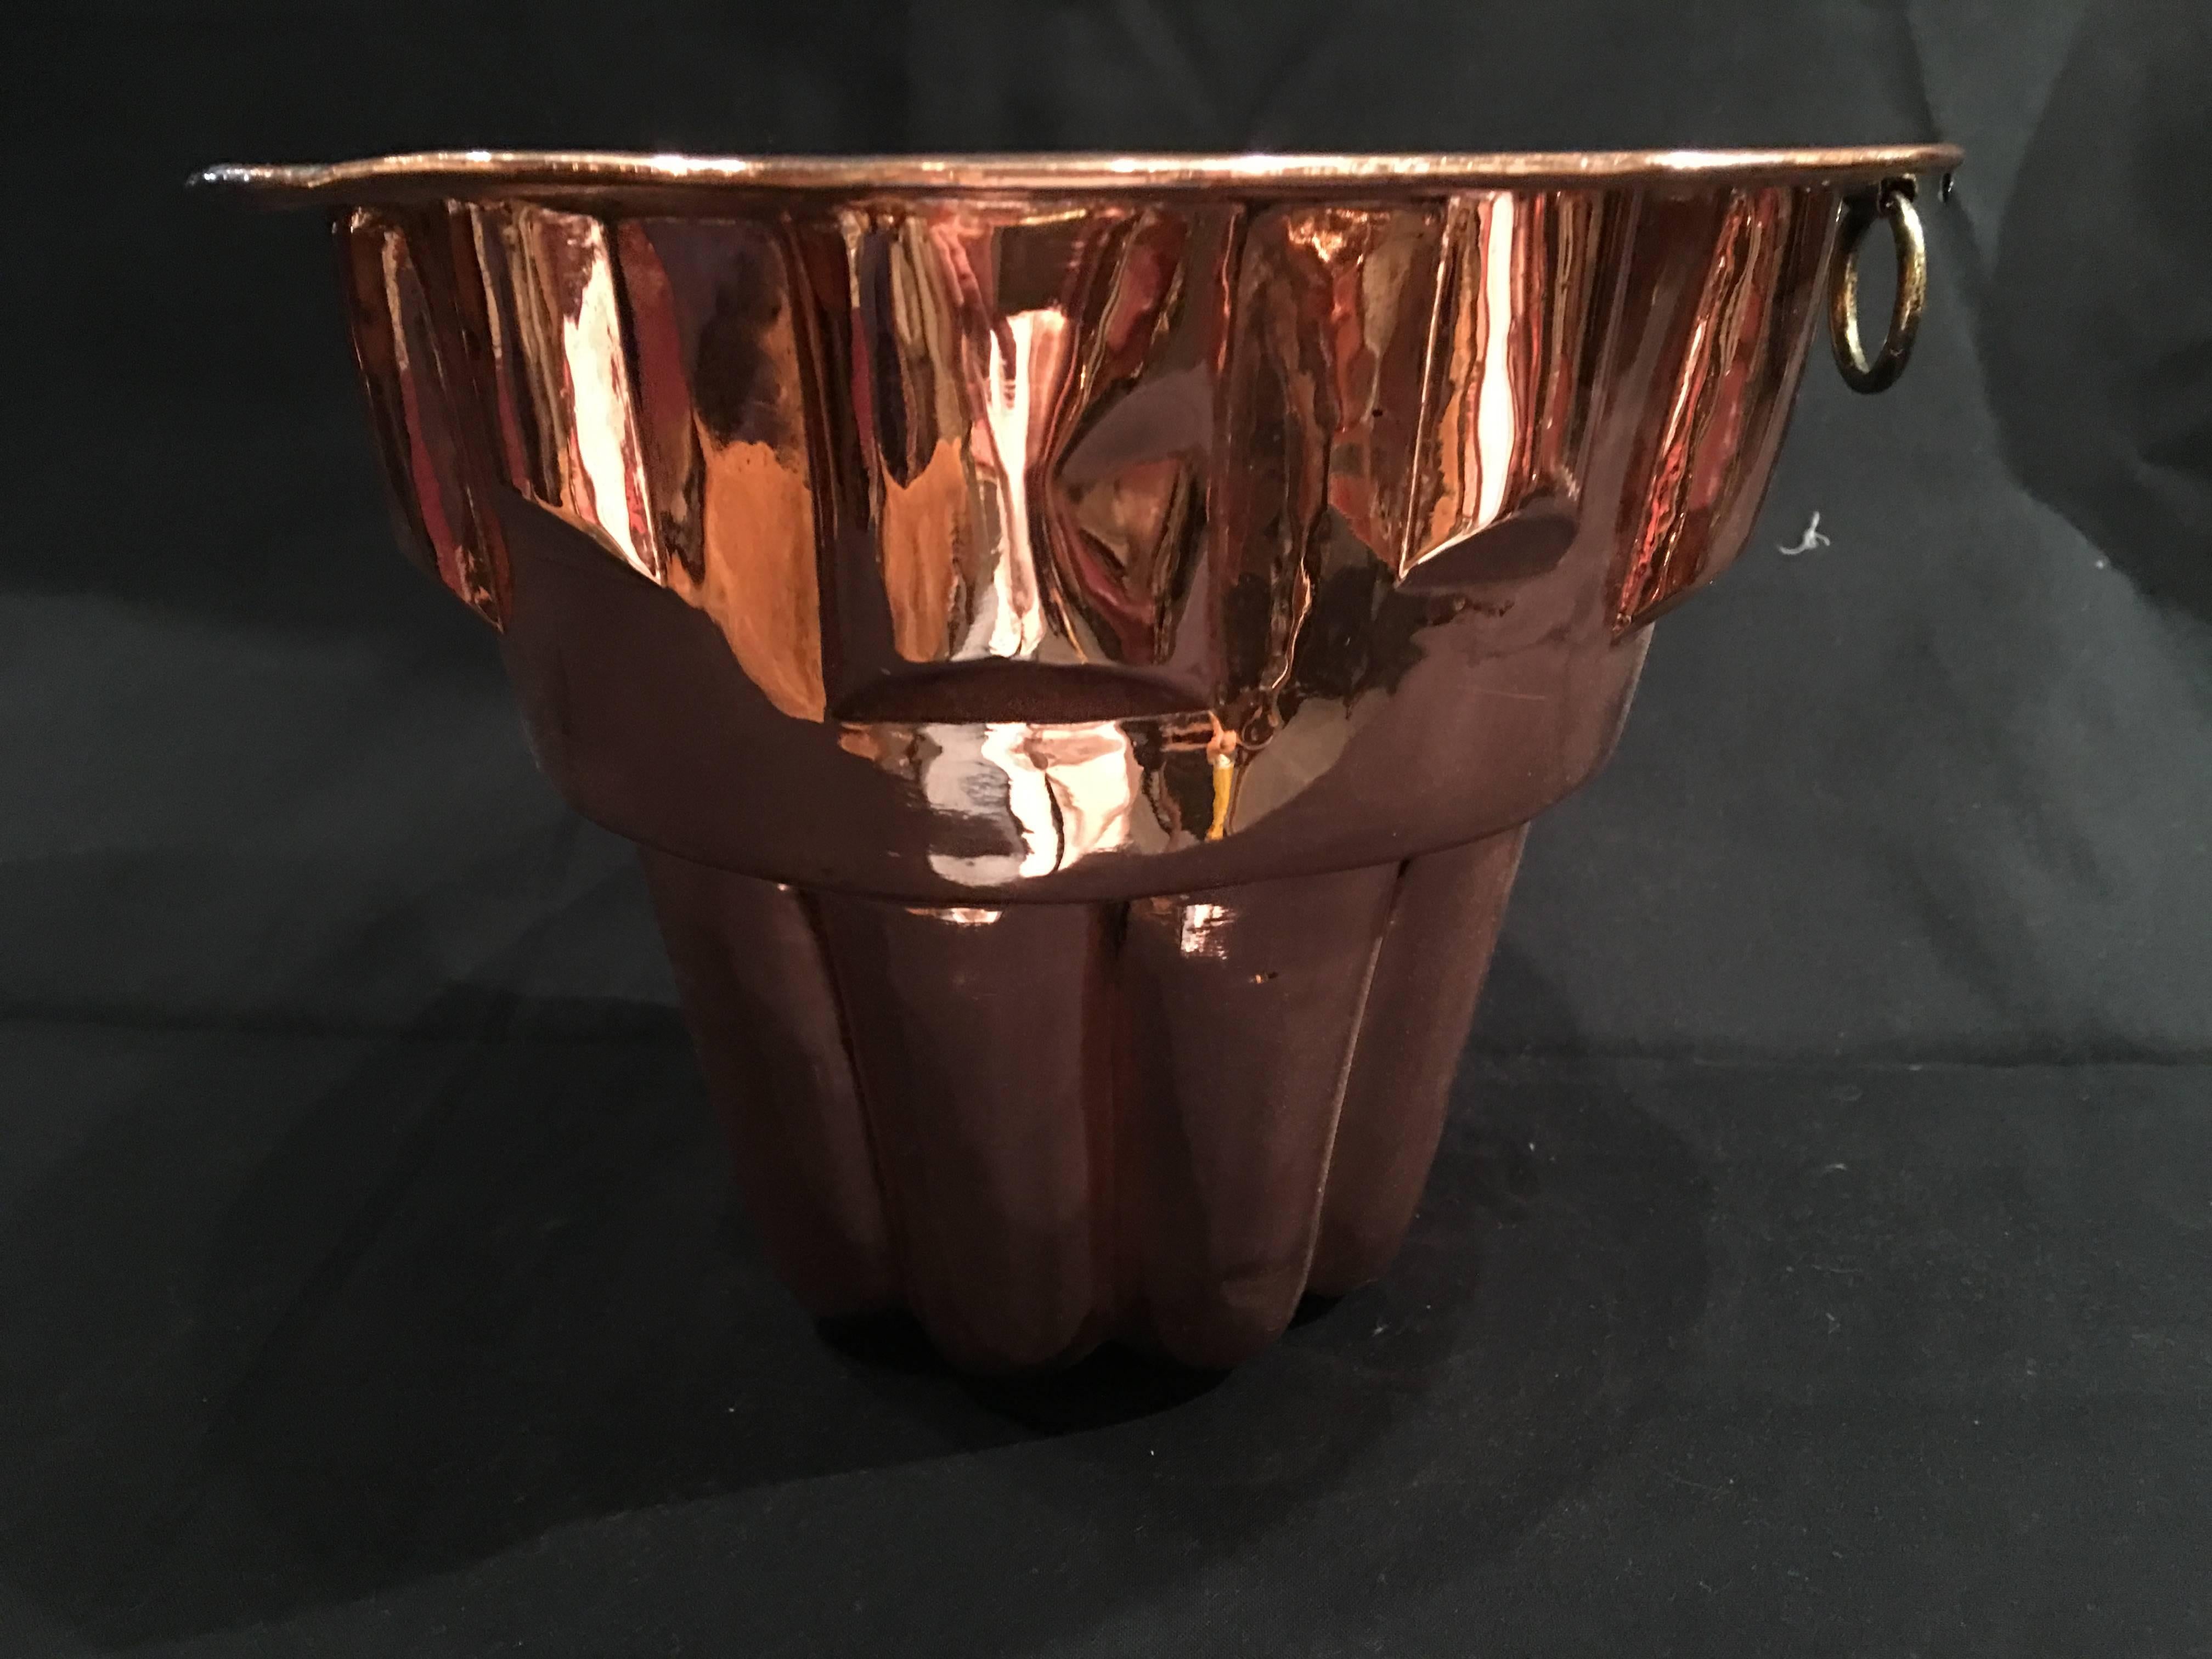 English polished copper jelly mould with a round iron handle, 19th century.